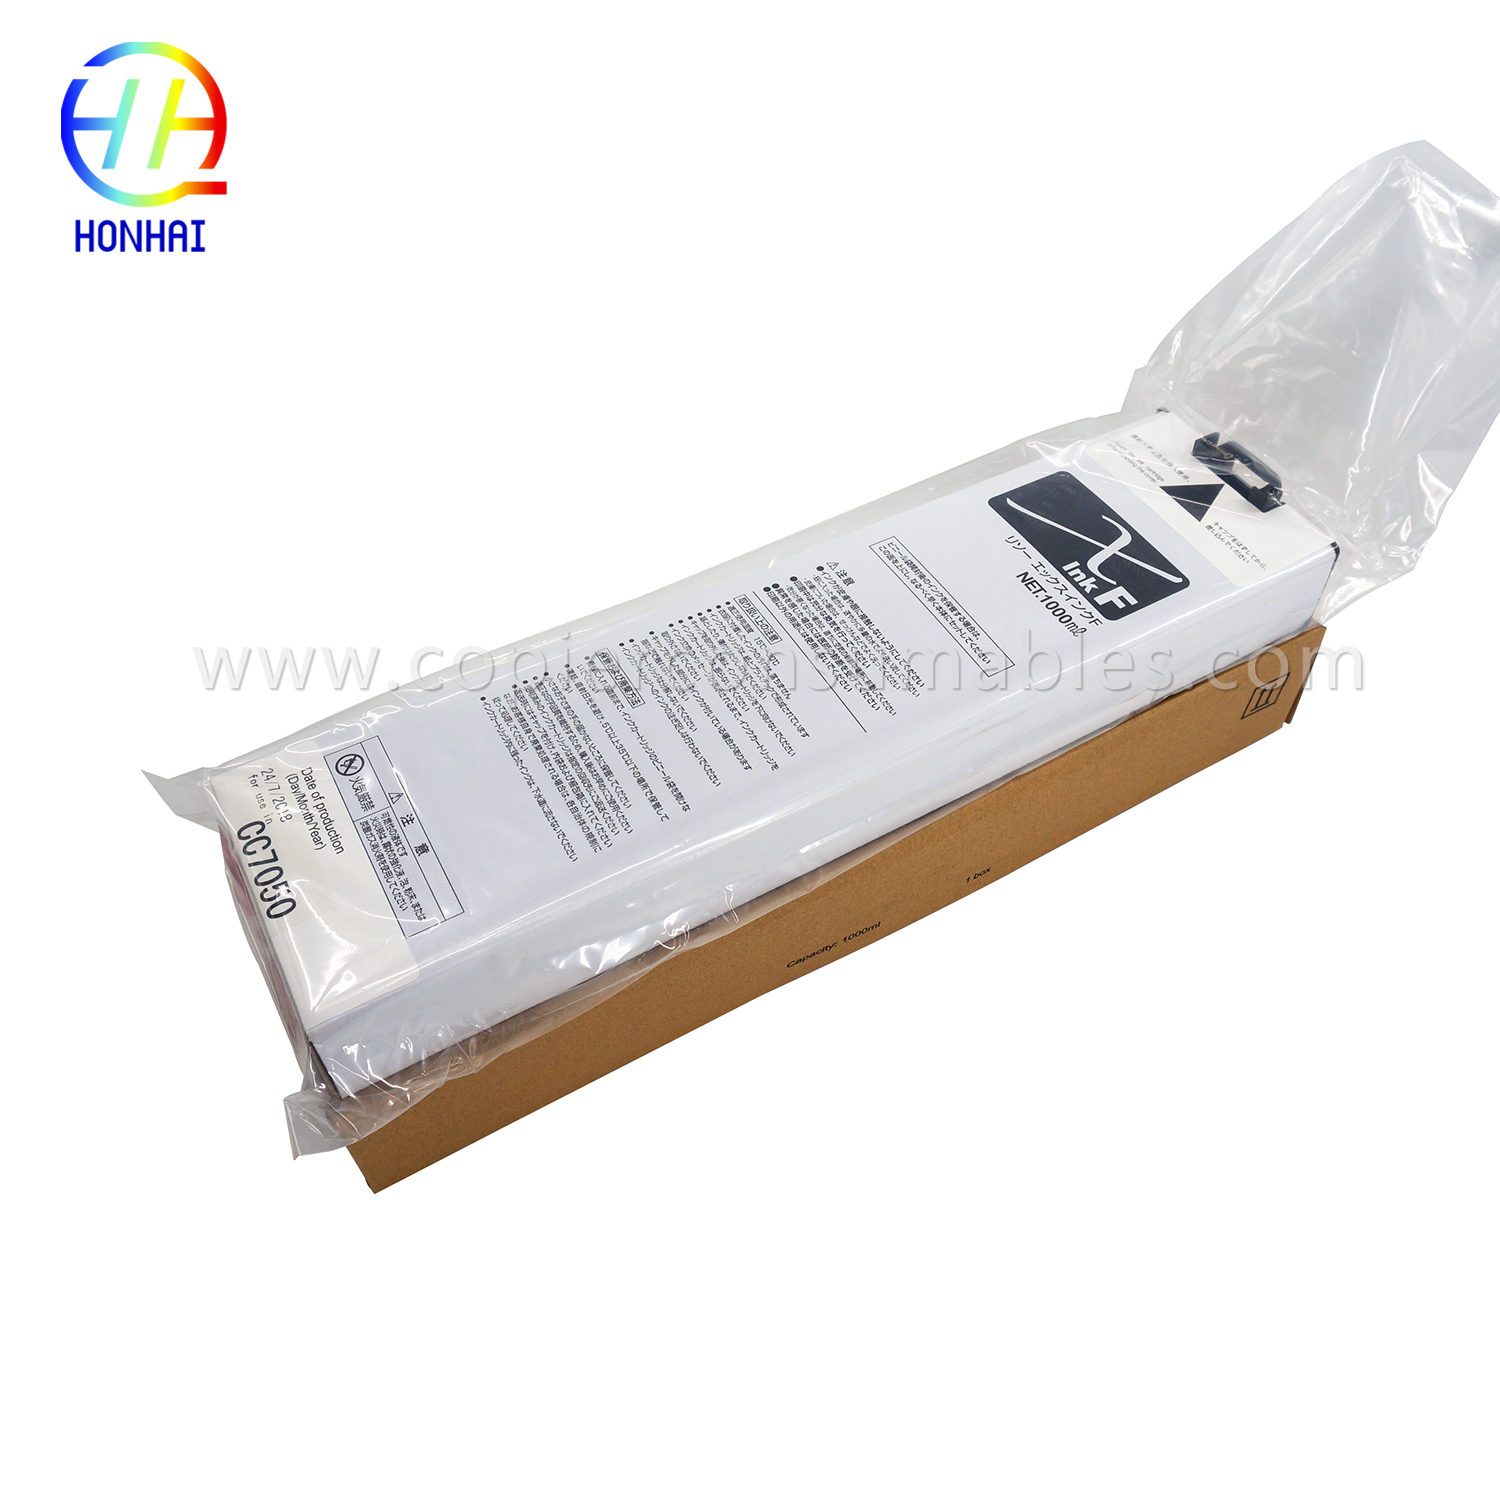 Ink Cartridge Risograph ComColor 3010 3050 3150 7010 7050 7150 9050 9150 HC 5000 5500 (S-6300G S-6301G S-6302G S-6303G) (1) 拷贝